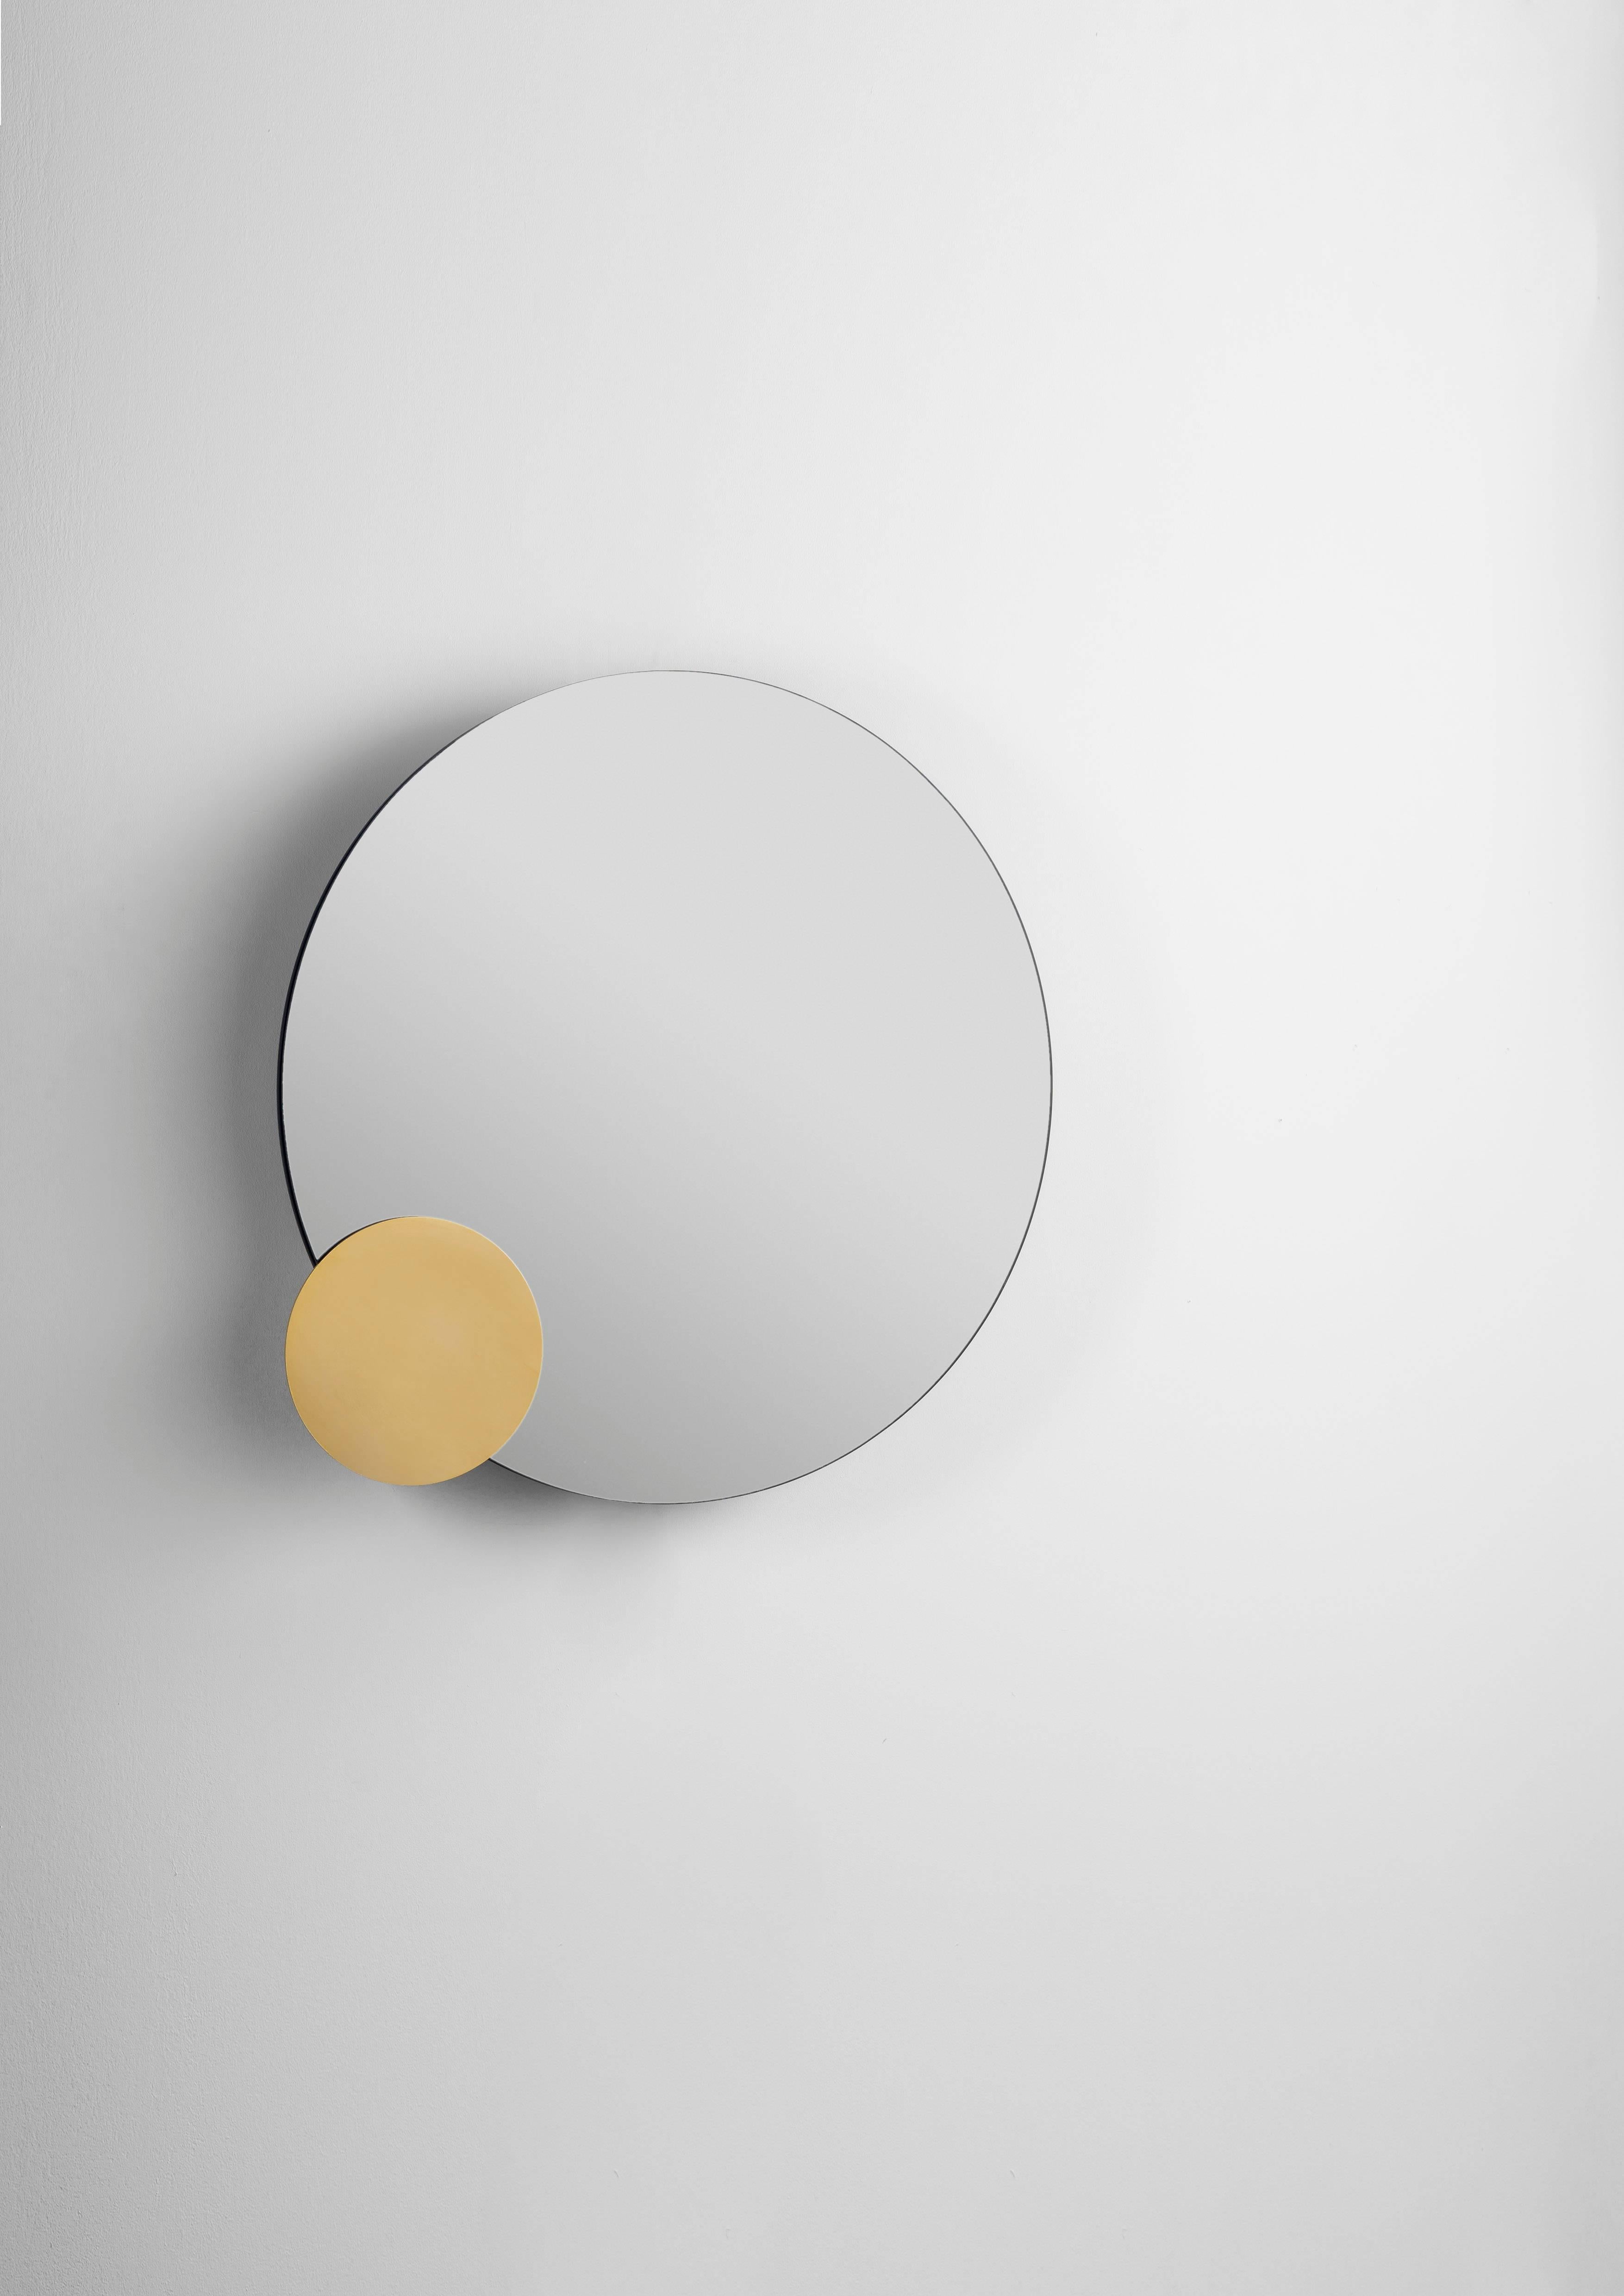 Contemporary Limited Edition Lunar Tale Mirror by Loulwa Al Radwan for BD Art Editions For Sale